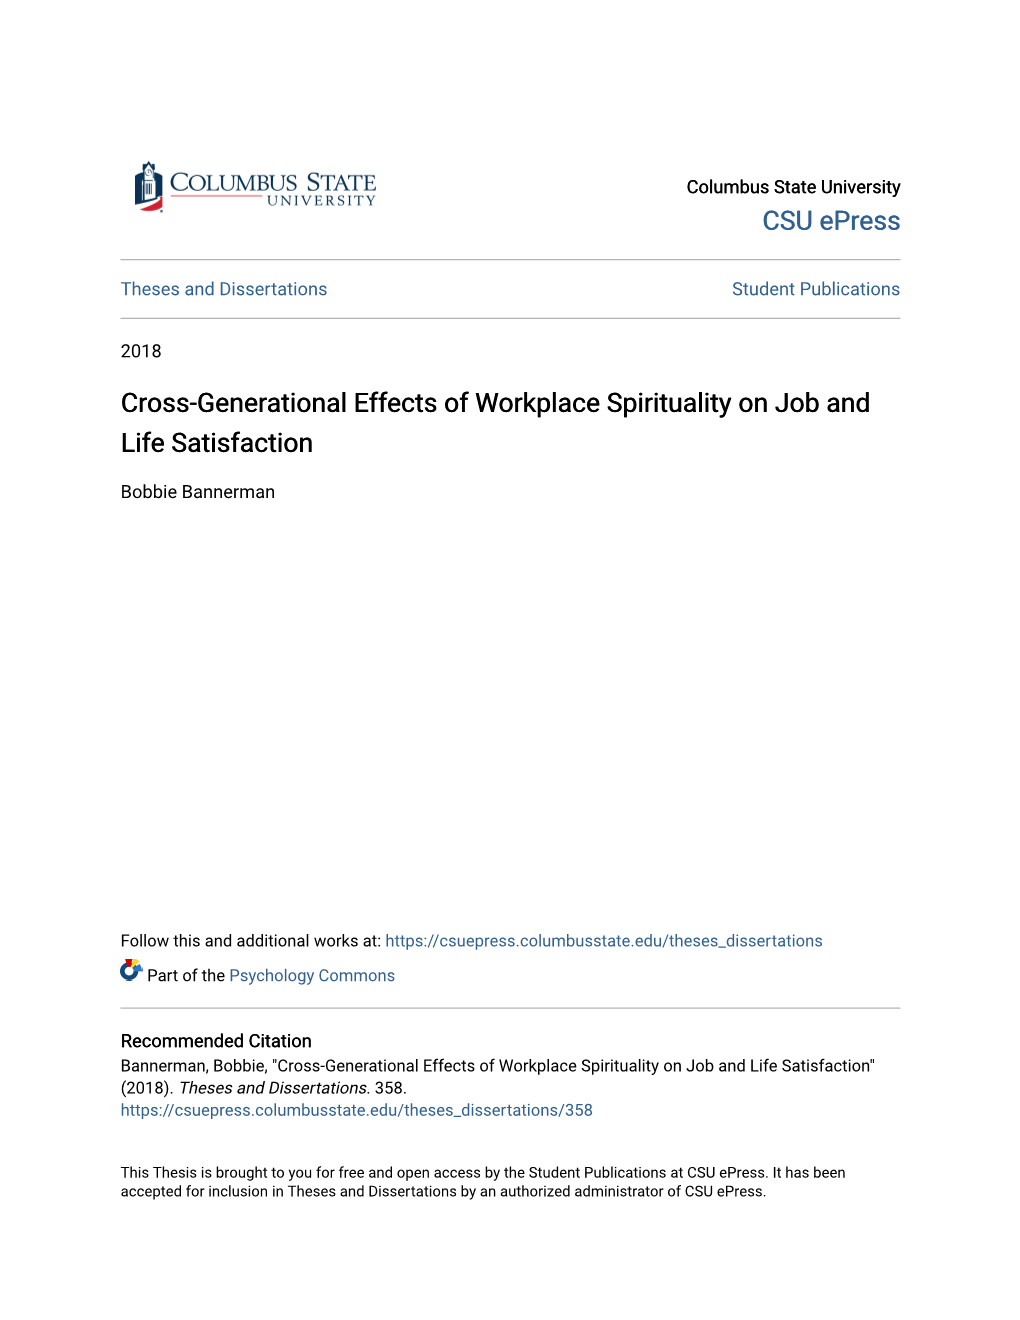 Cross-Generational Effects of Workplace Spirituality on Job and Life Satisfaction